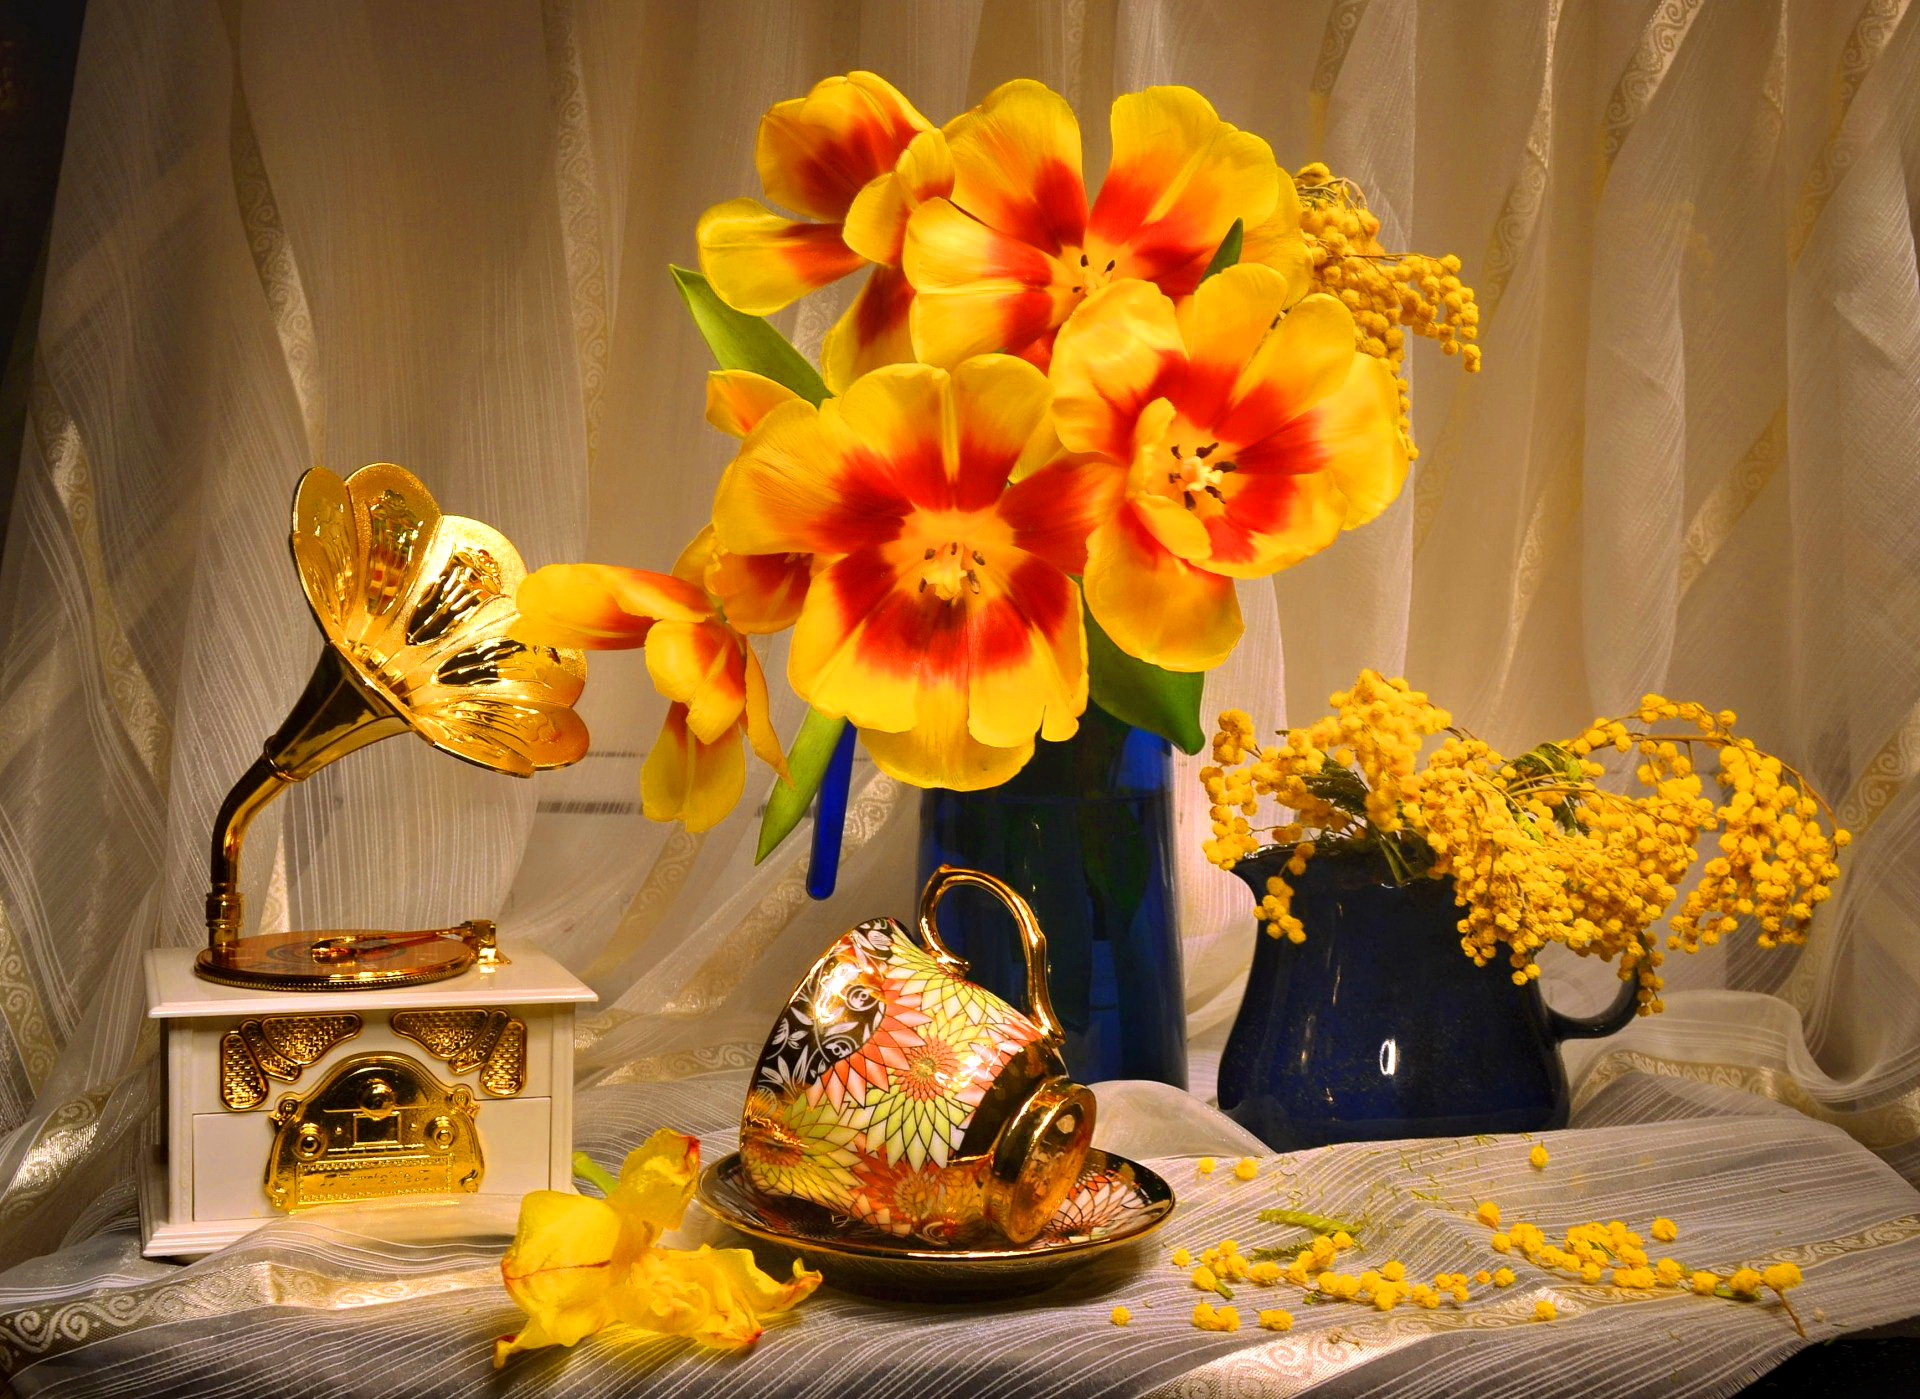 flower, photography, still life, cup, gramophone, tulip, vase, yellow flower